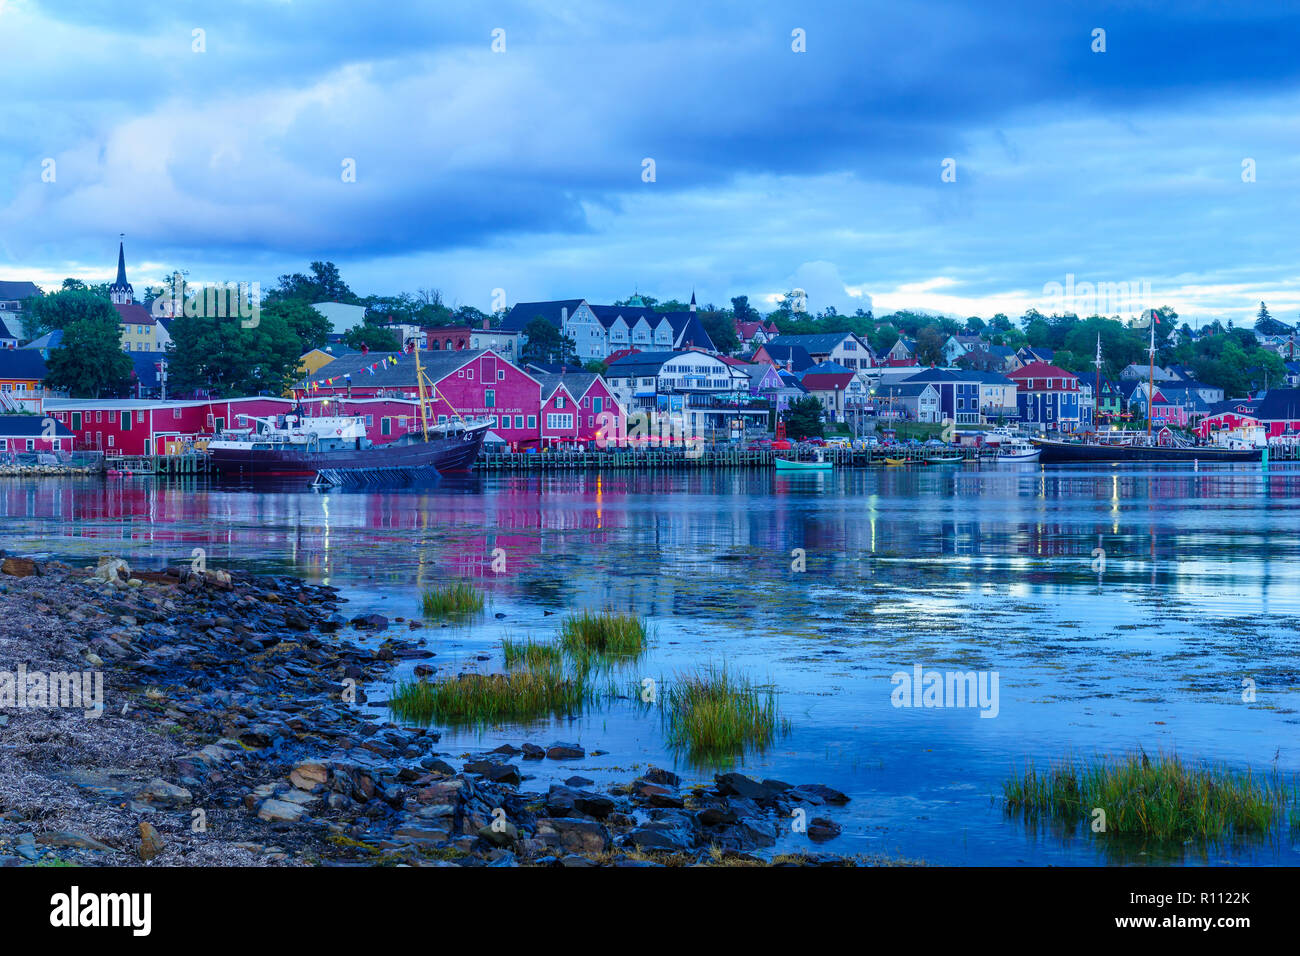 Lunenburg, Canada - September 20, 2018: Sunset view of the waterfront and port of the historic town Lunenburg, Nova Scotia, Canada Stock Photo